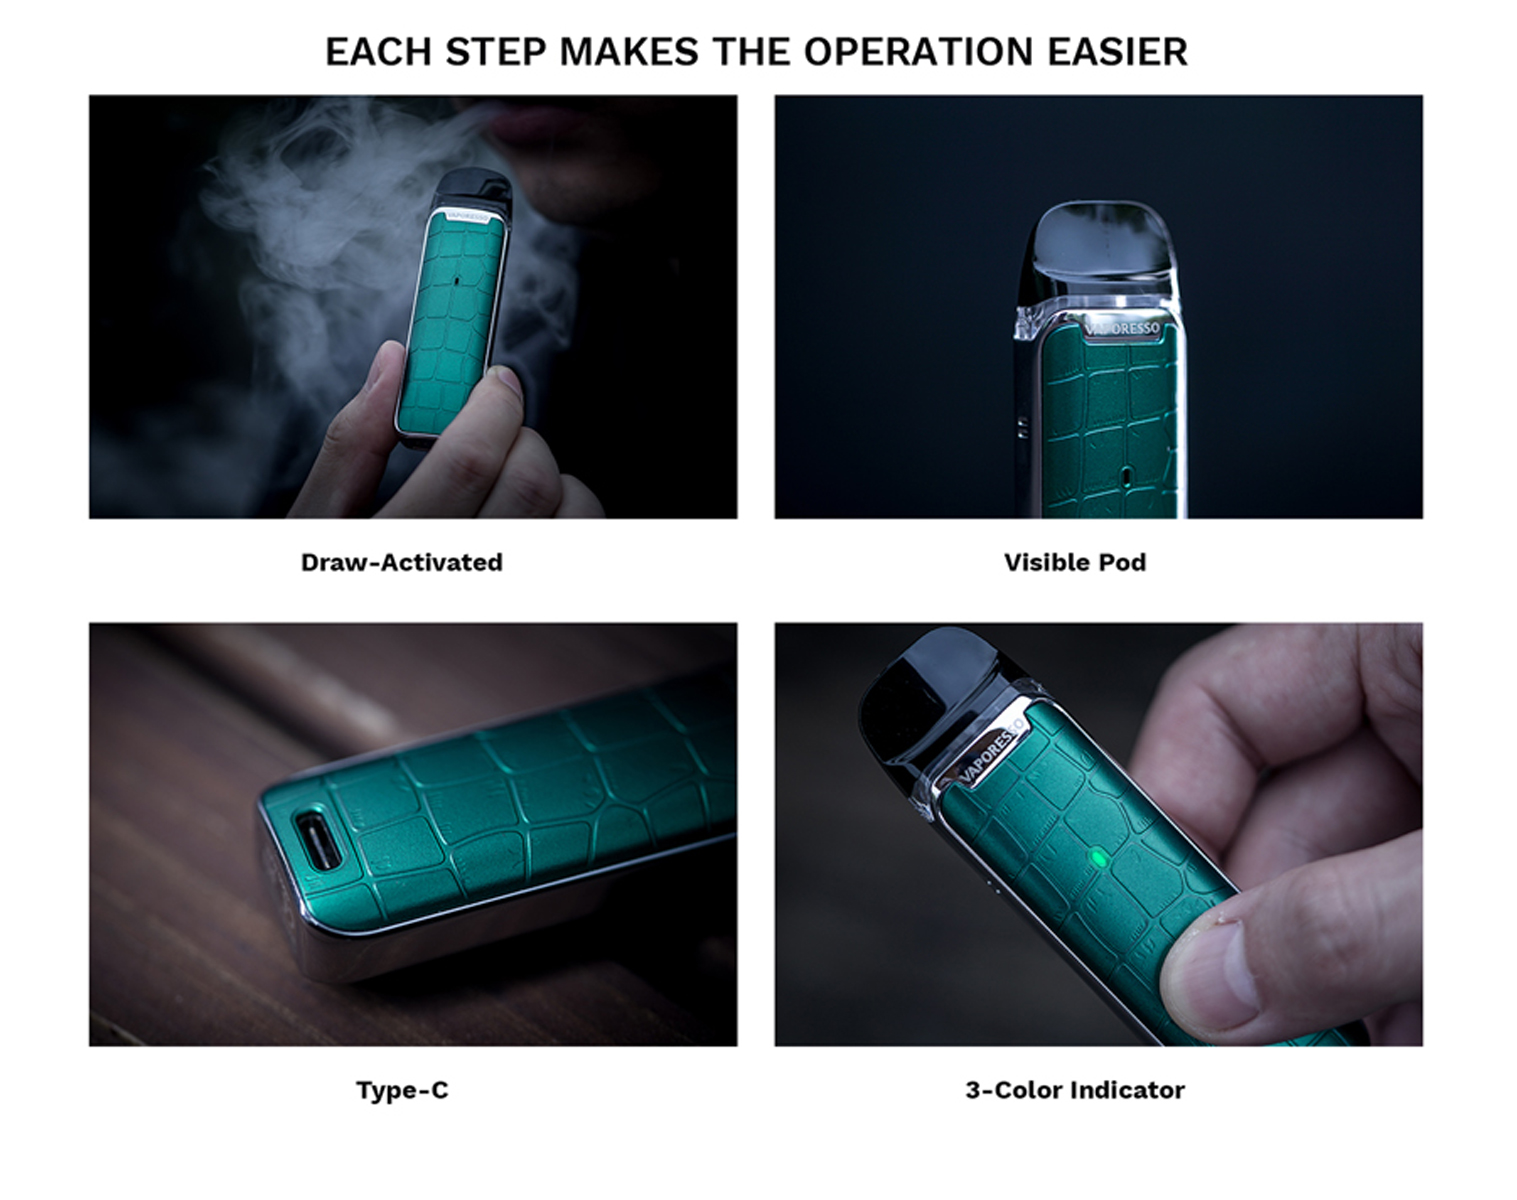 Vaporesso Luxe Q easy operation